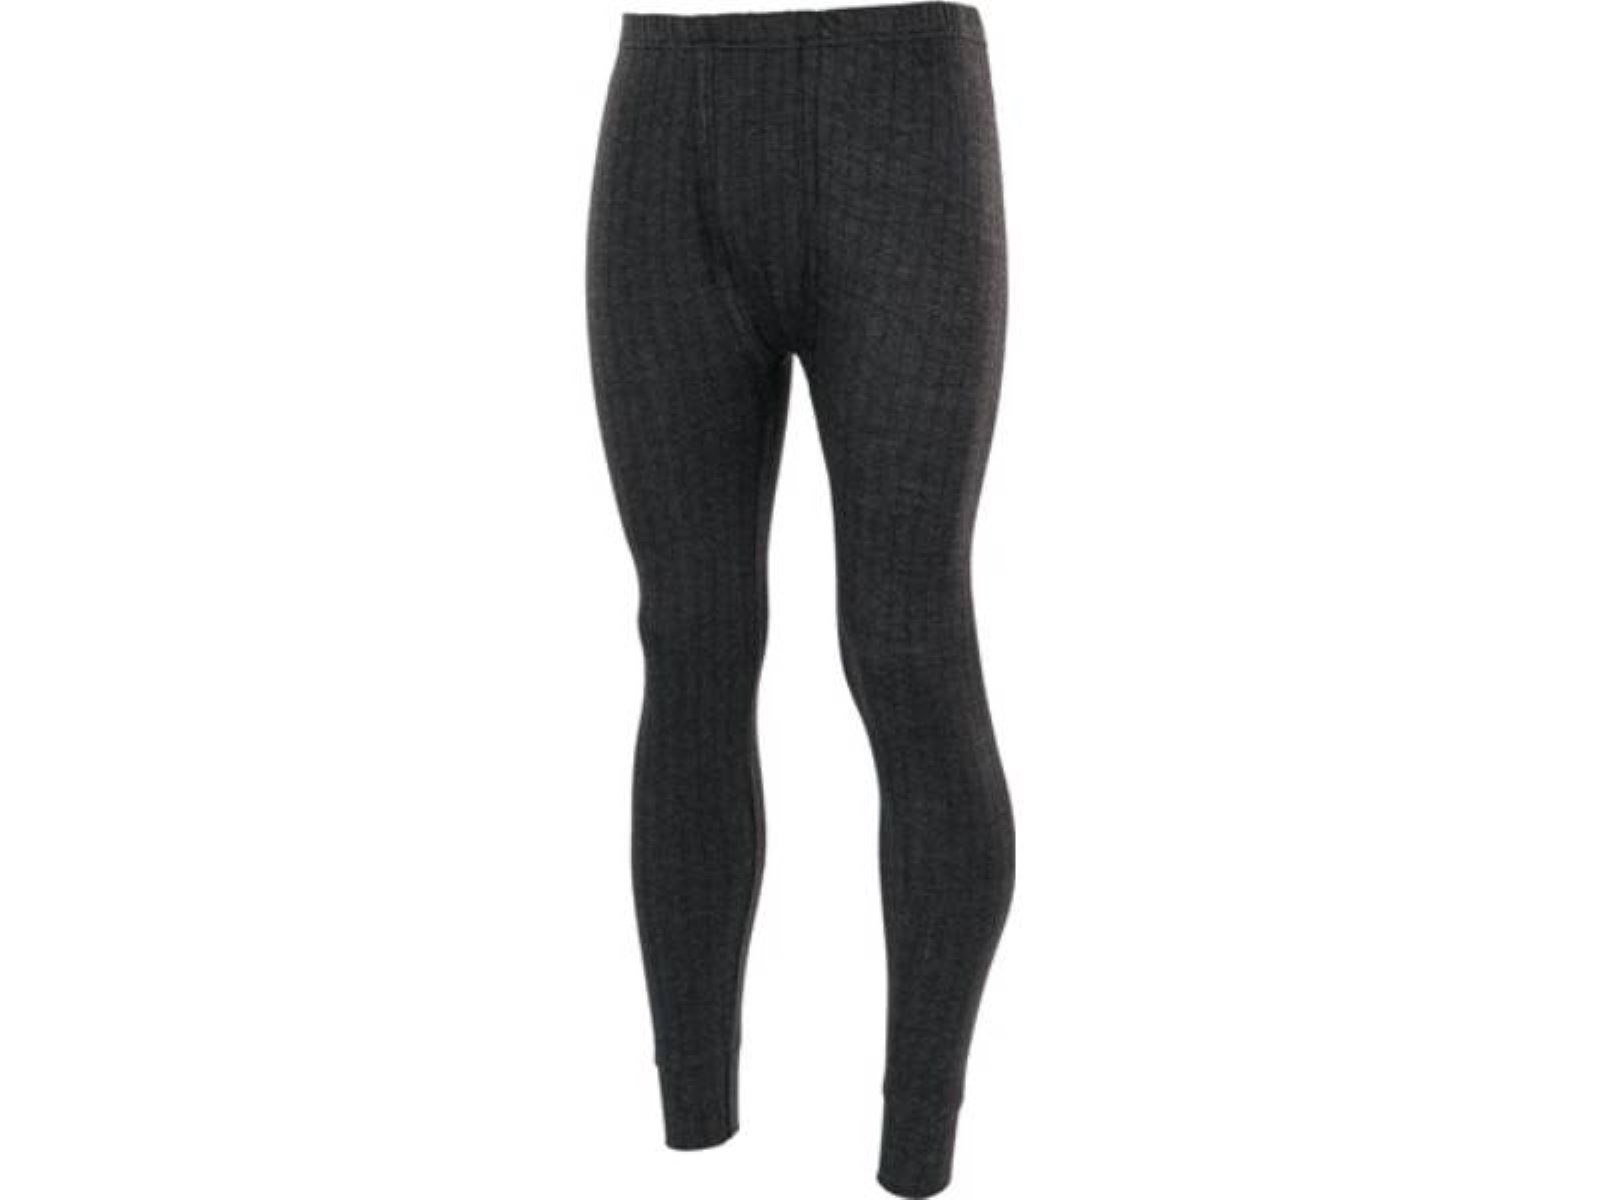 ISM Schutzhose Thermo-Funktionshose THERMOGETIC Gr.XXL 75% Material: Bau anth.ISM TRS